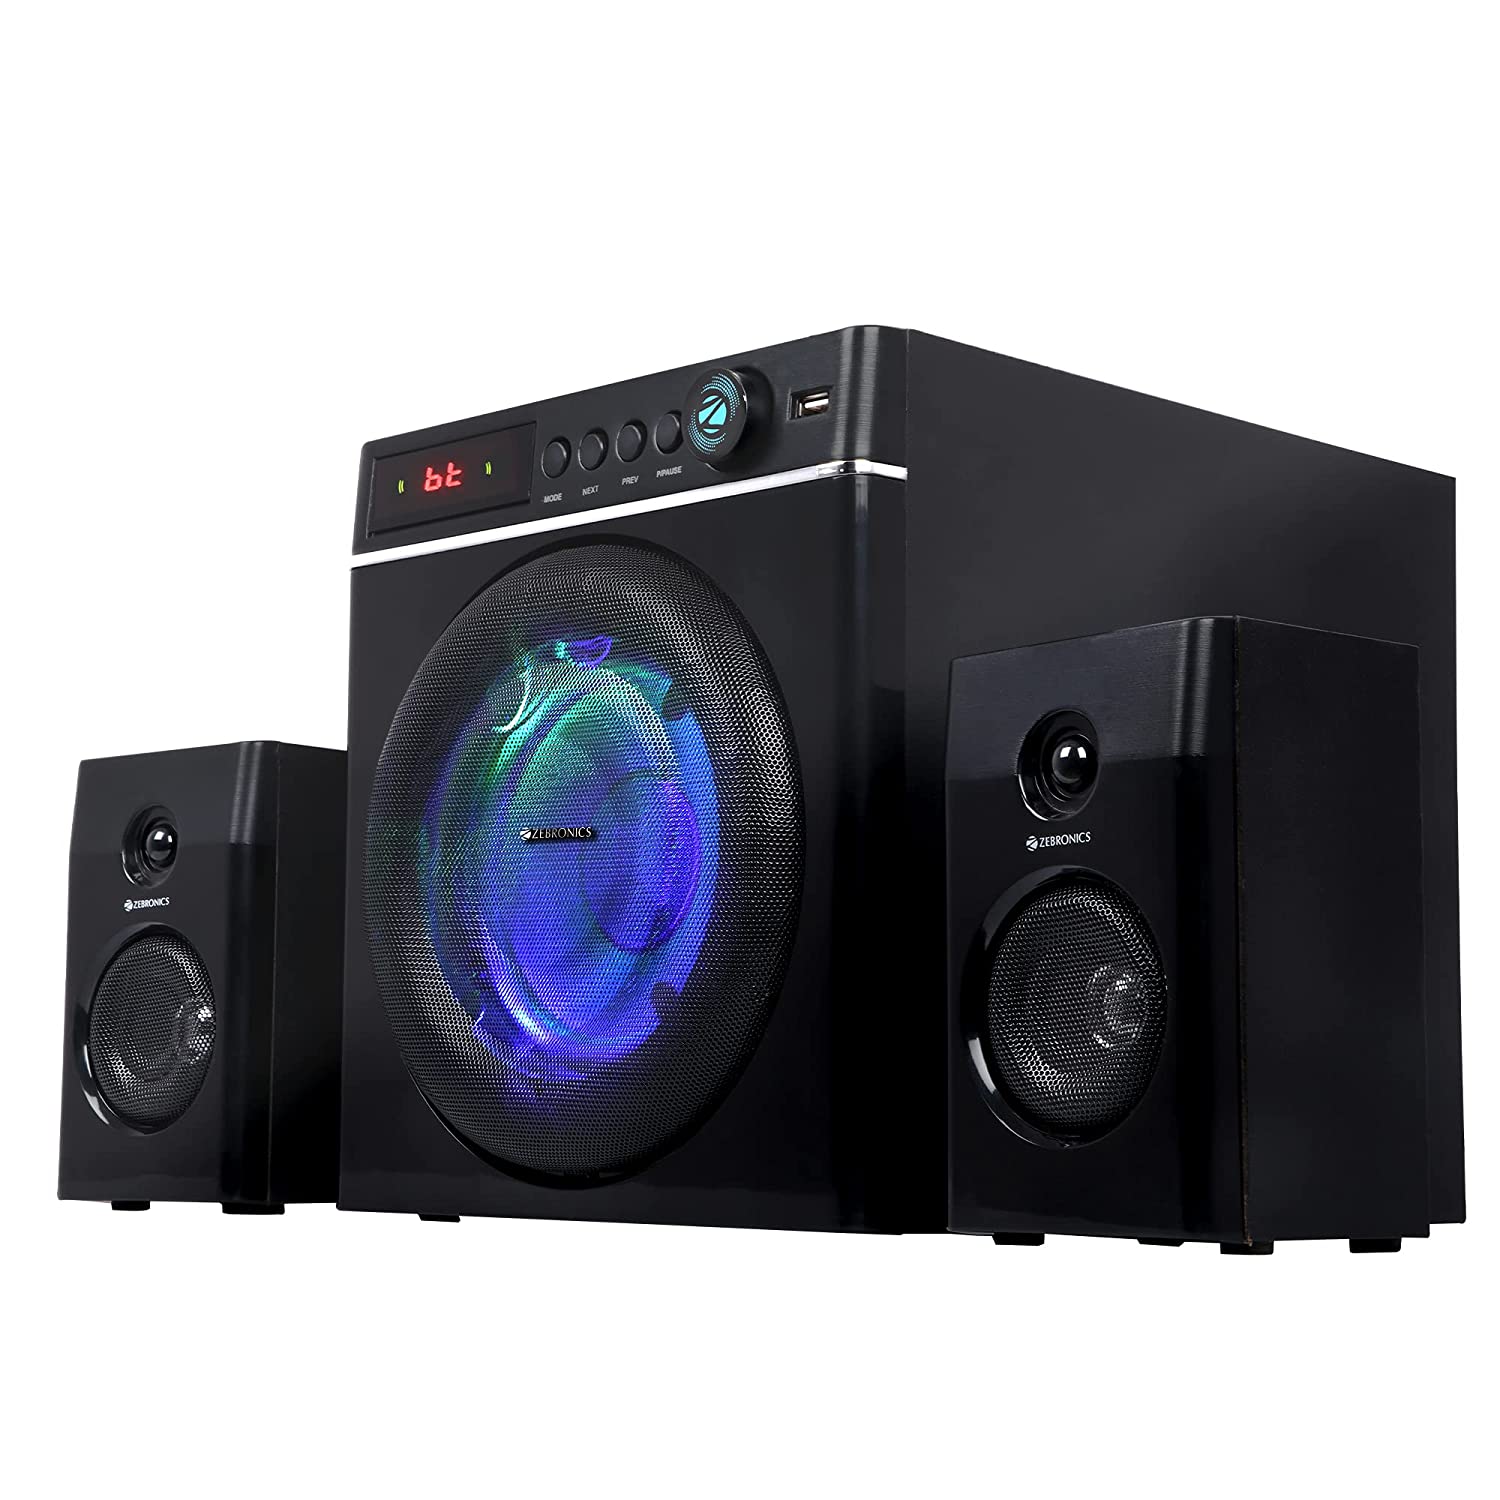 Zebronics Zeb-Cube 5 Home Theater Speaker with Subwoofer, 100W, 4.1 Channel, Wireless BTv5.1 Connectivity,